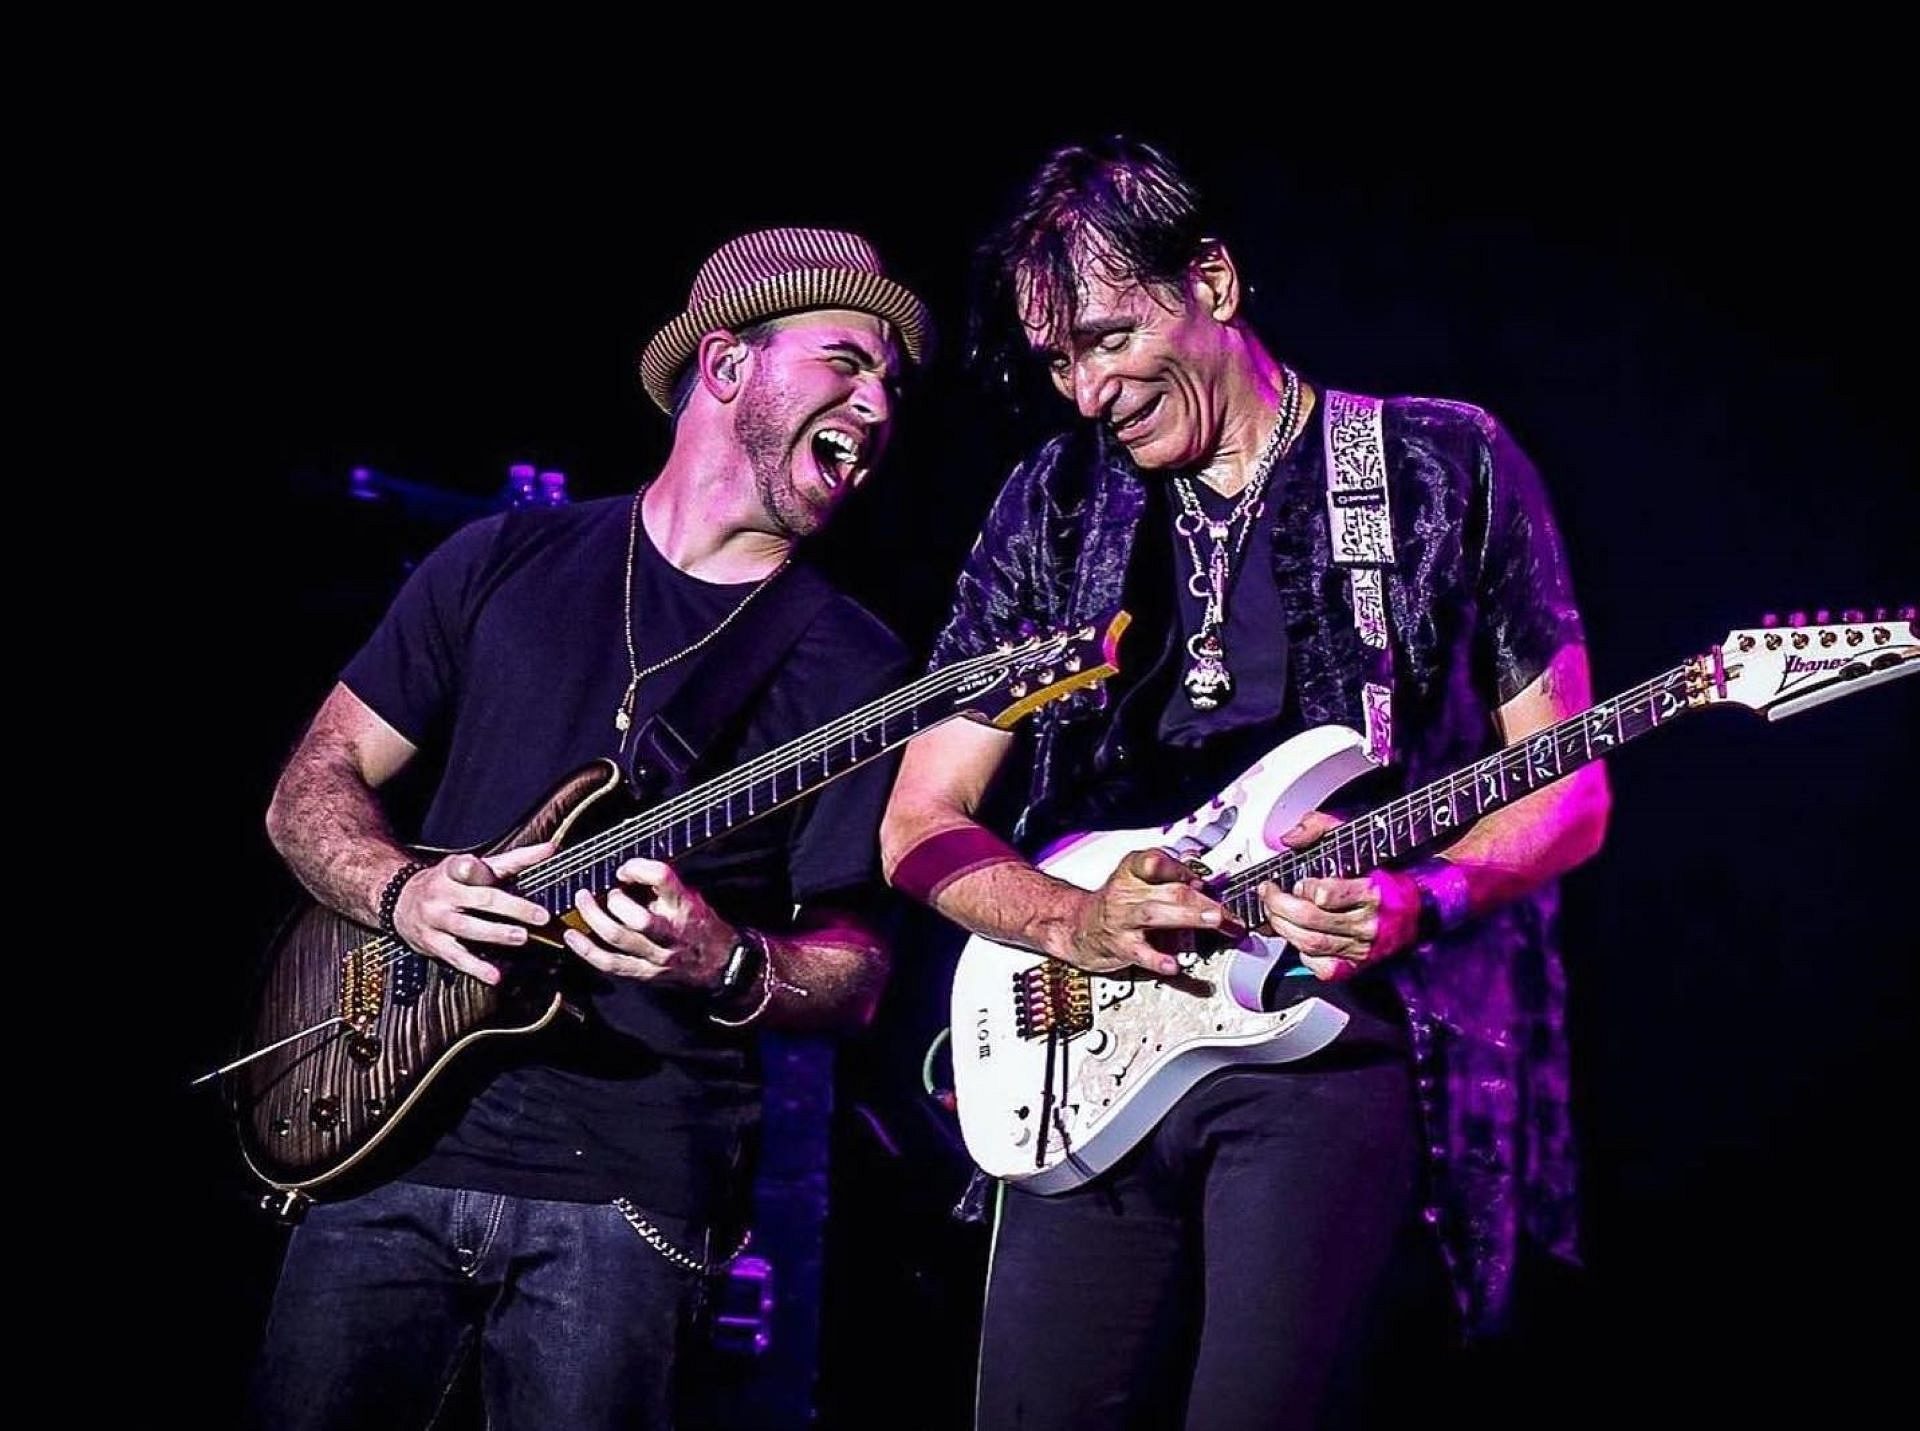 Dave Weiner Retires from Steve Vai's Touring Band